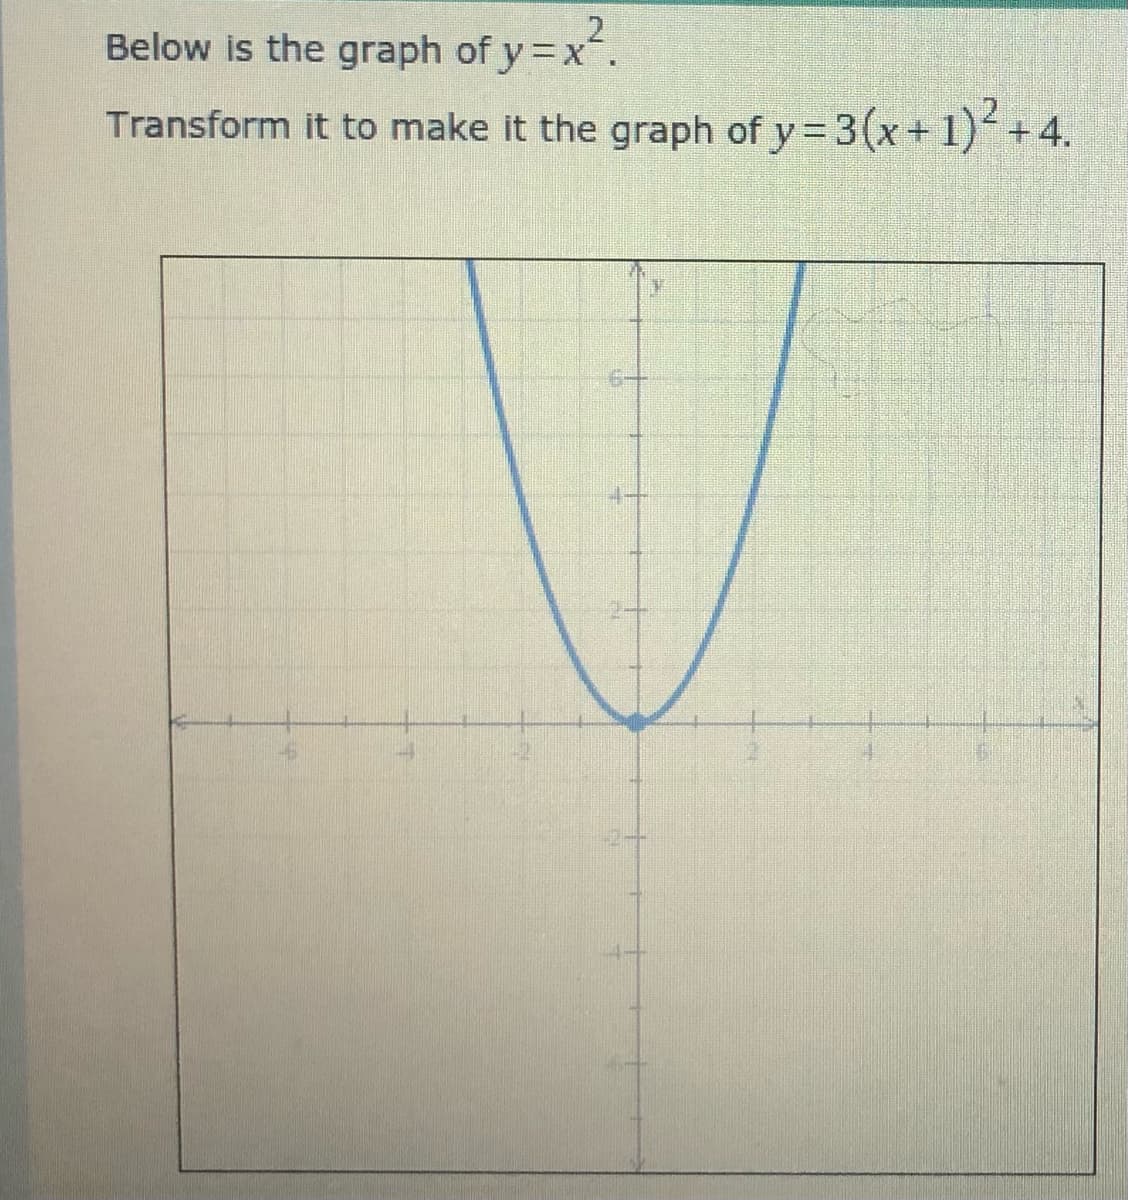 Below is the graph of y=x.
Transform it to make it the graph of y= 3(x+ 1)+4.
